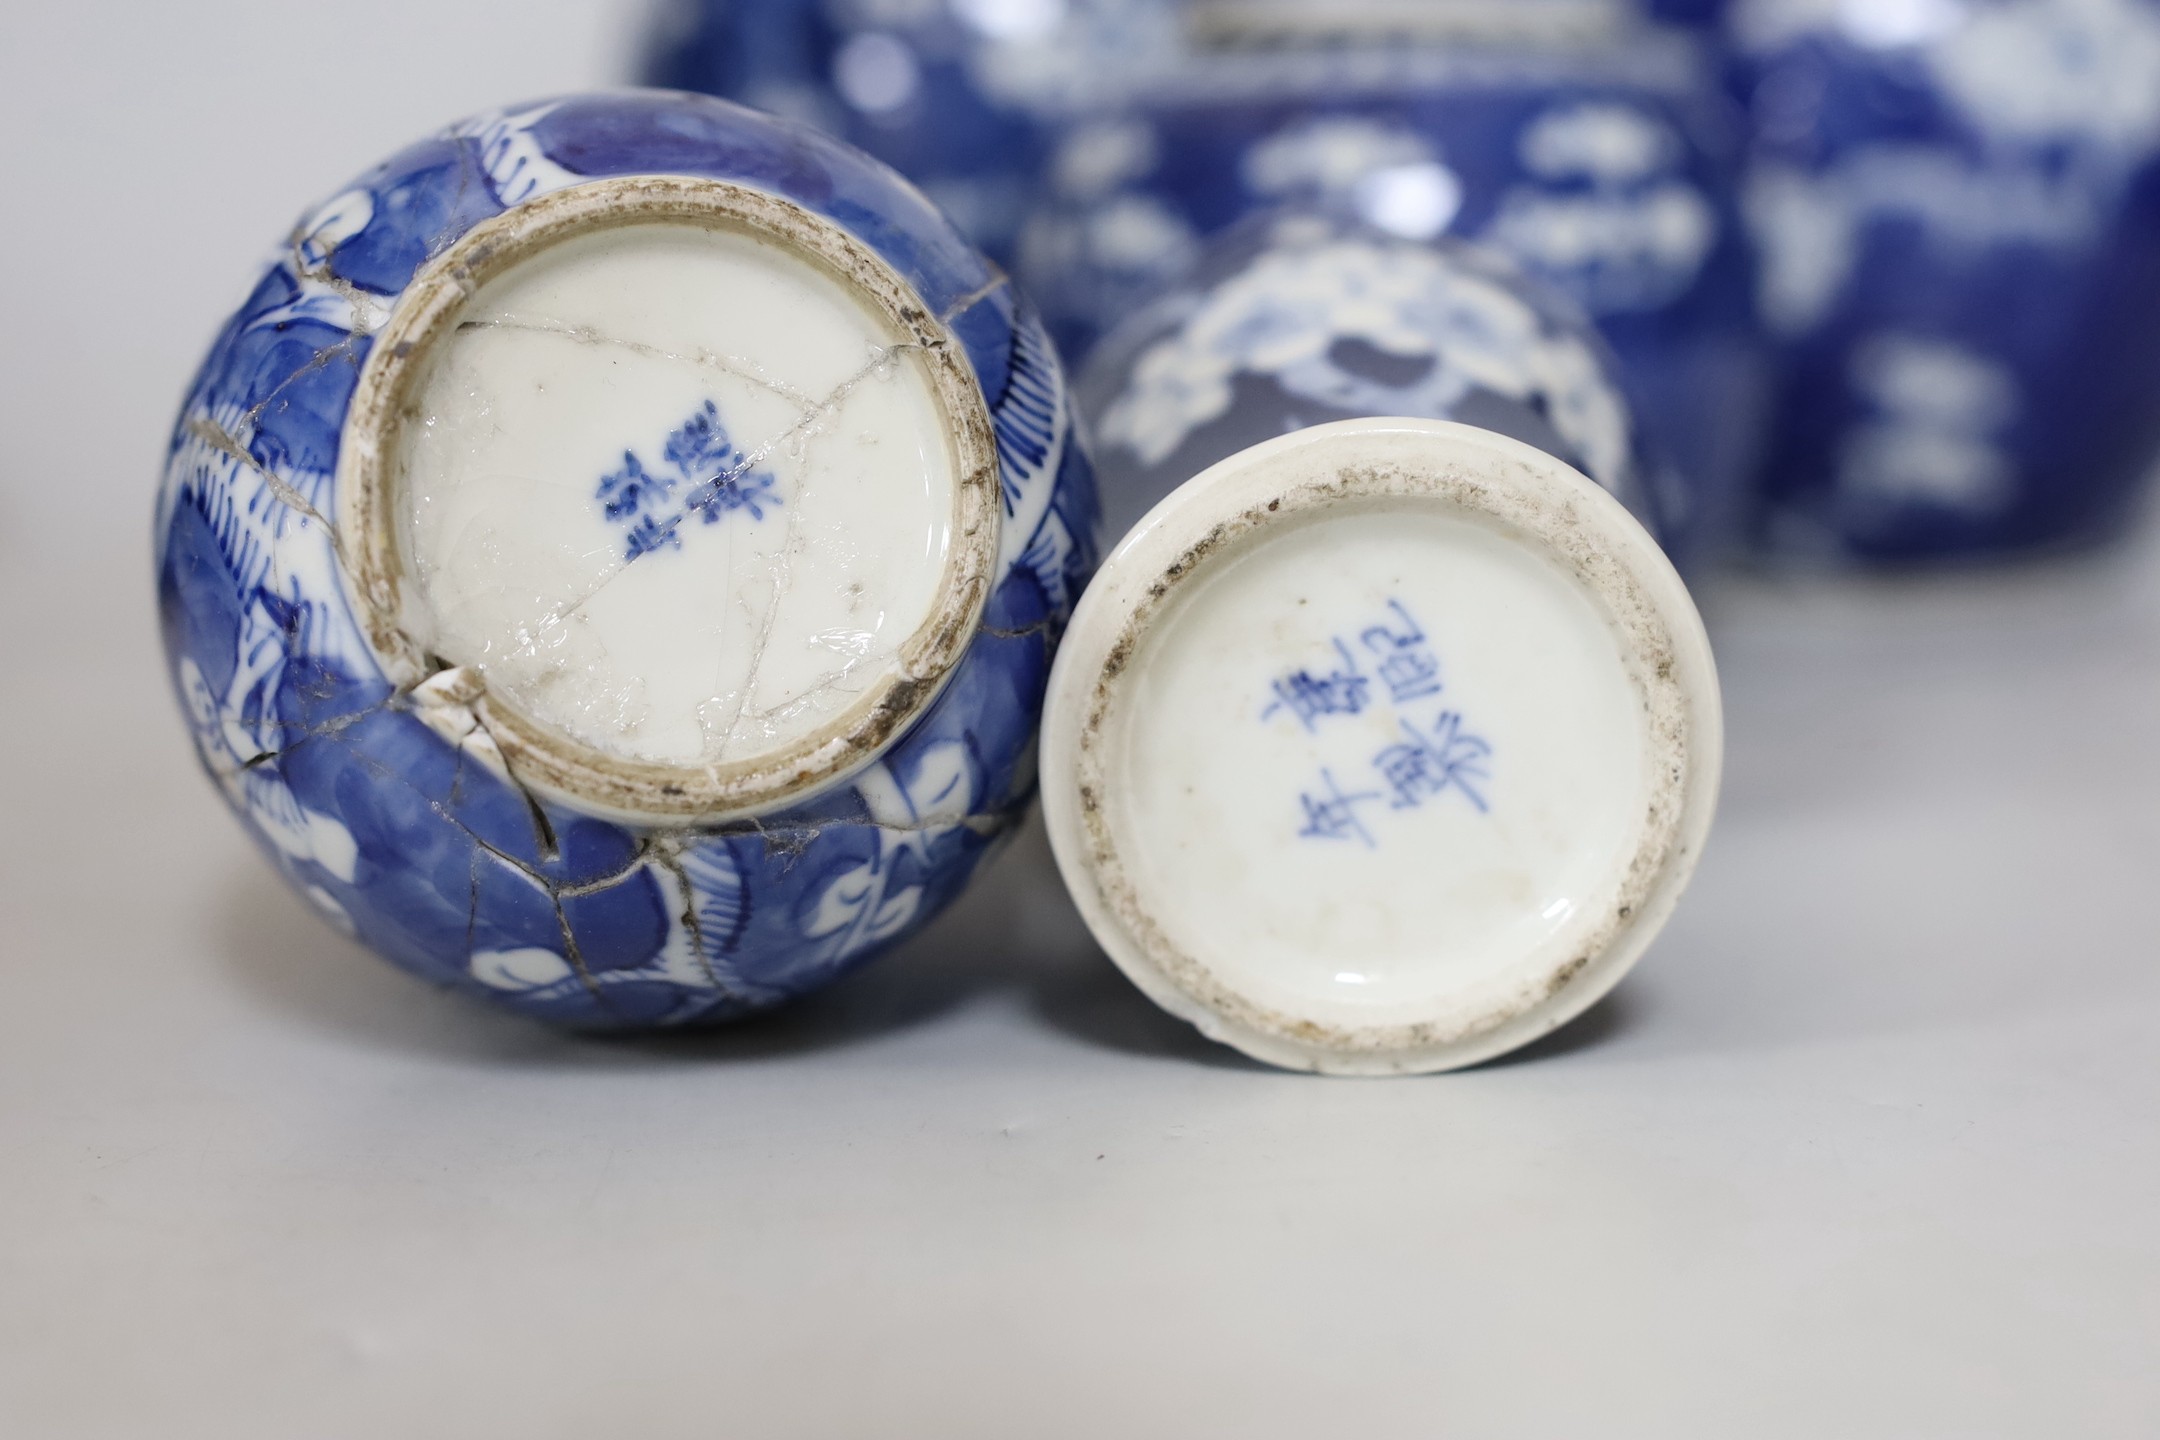 Four Chinese blue and white prunus pattern ginger jars, together with three similar vases. 19th/early 20th century, Tallest 15cm